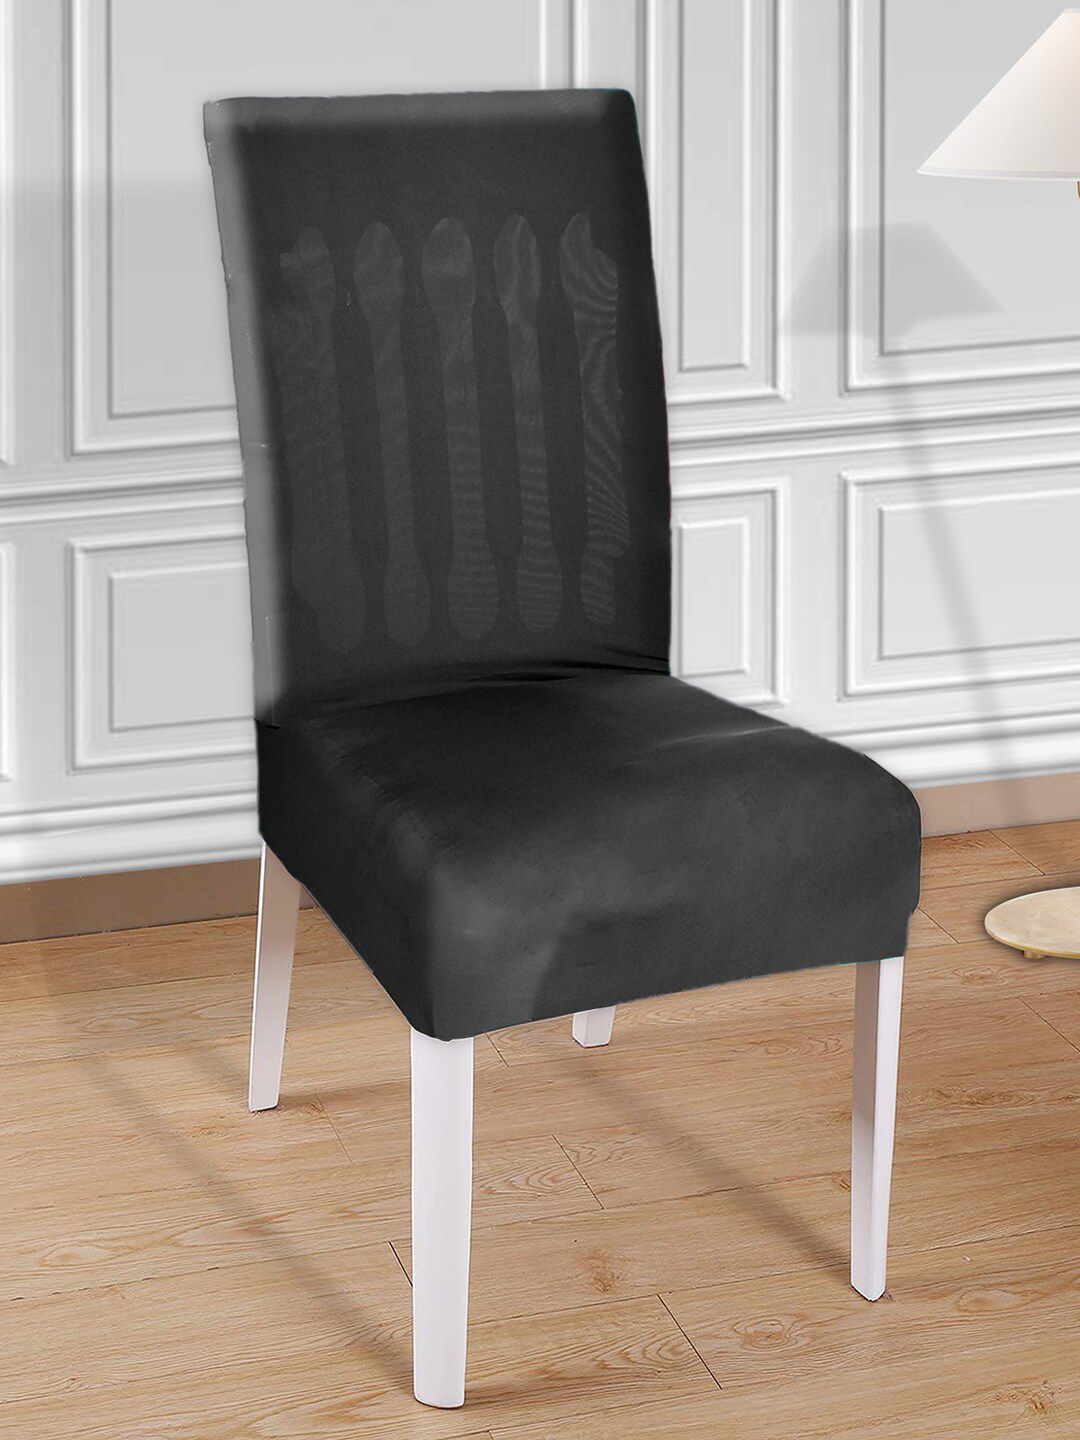 Kuber Industries Set Of 6 Black Solid Elastic Stretchable Chair Cover Price in India